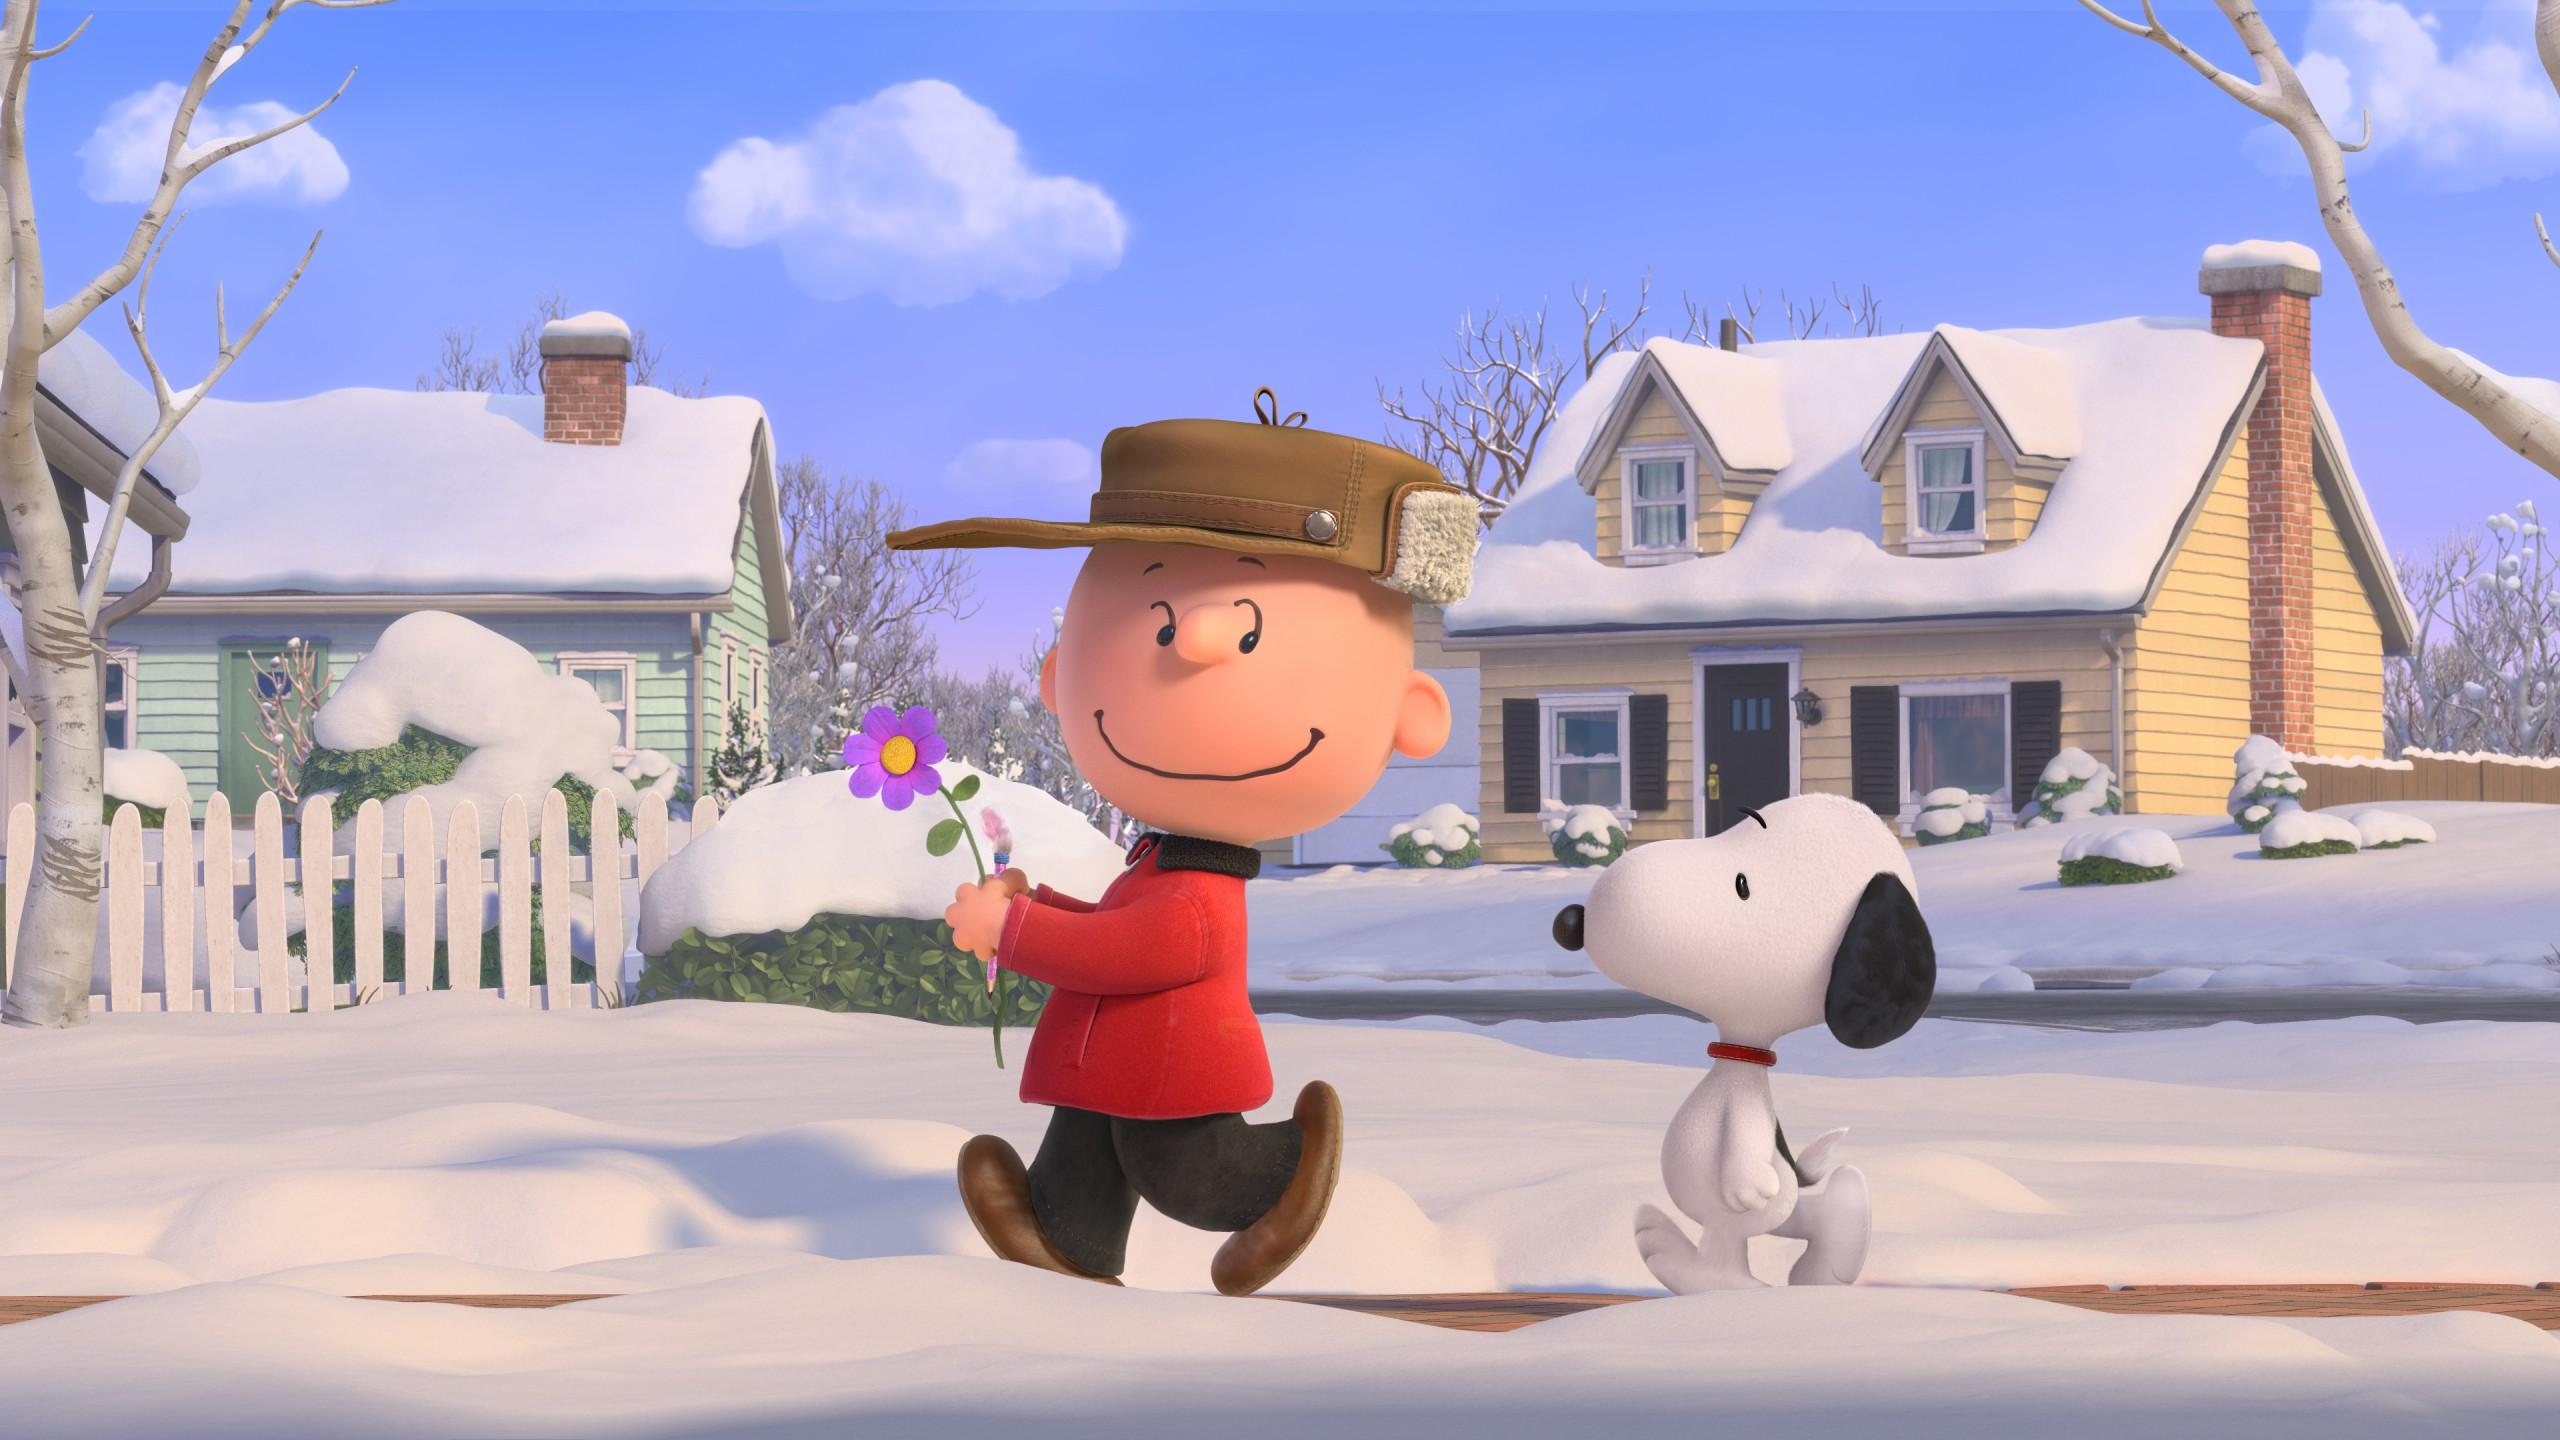 The Peanuts Winter Wallpapers - Wallpaper Cave